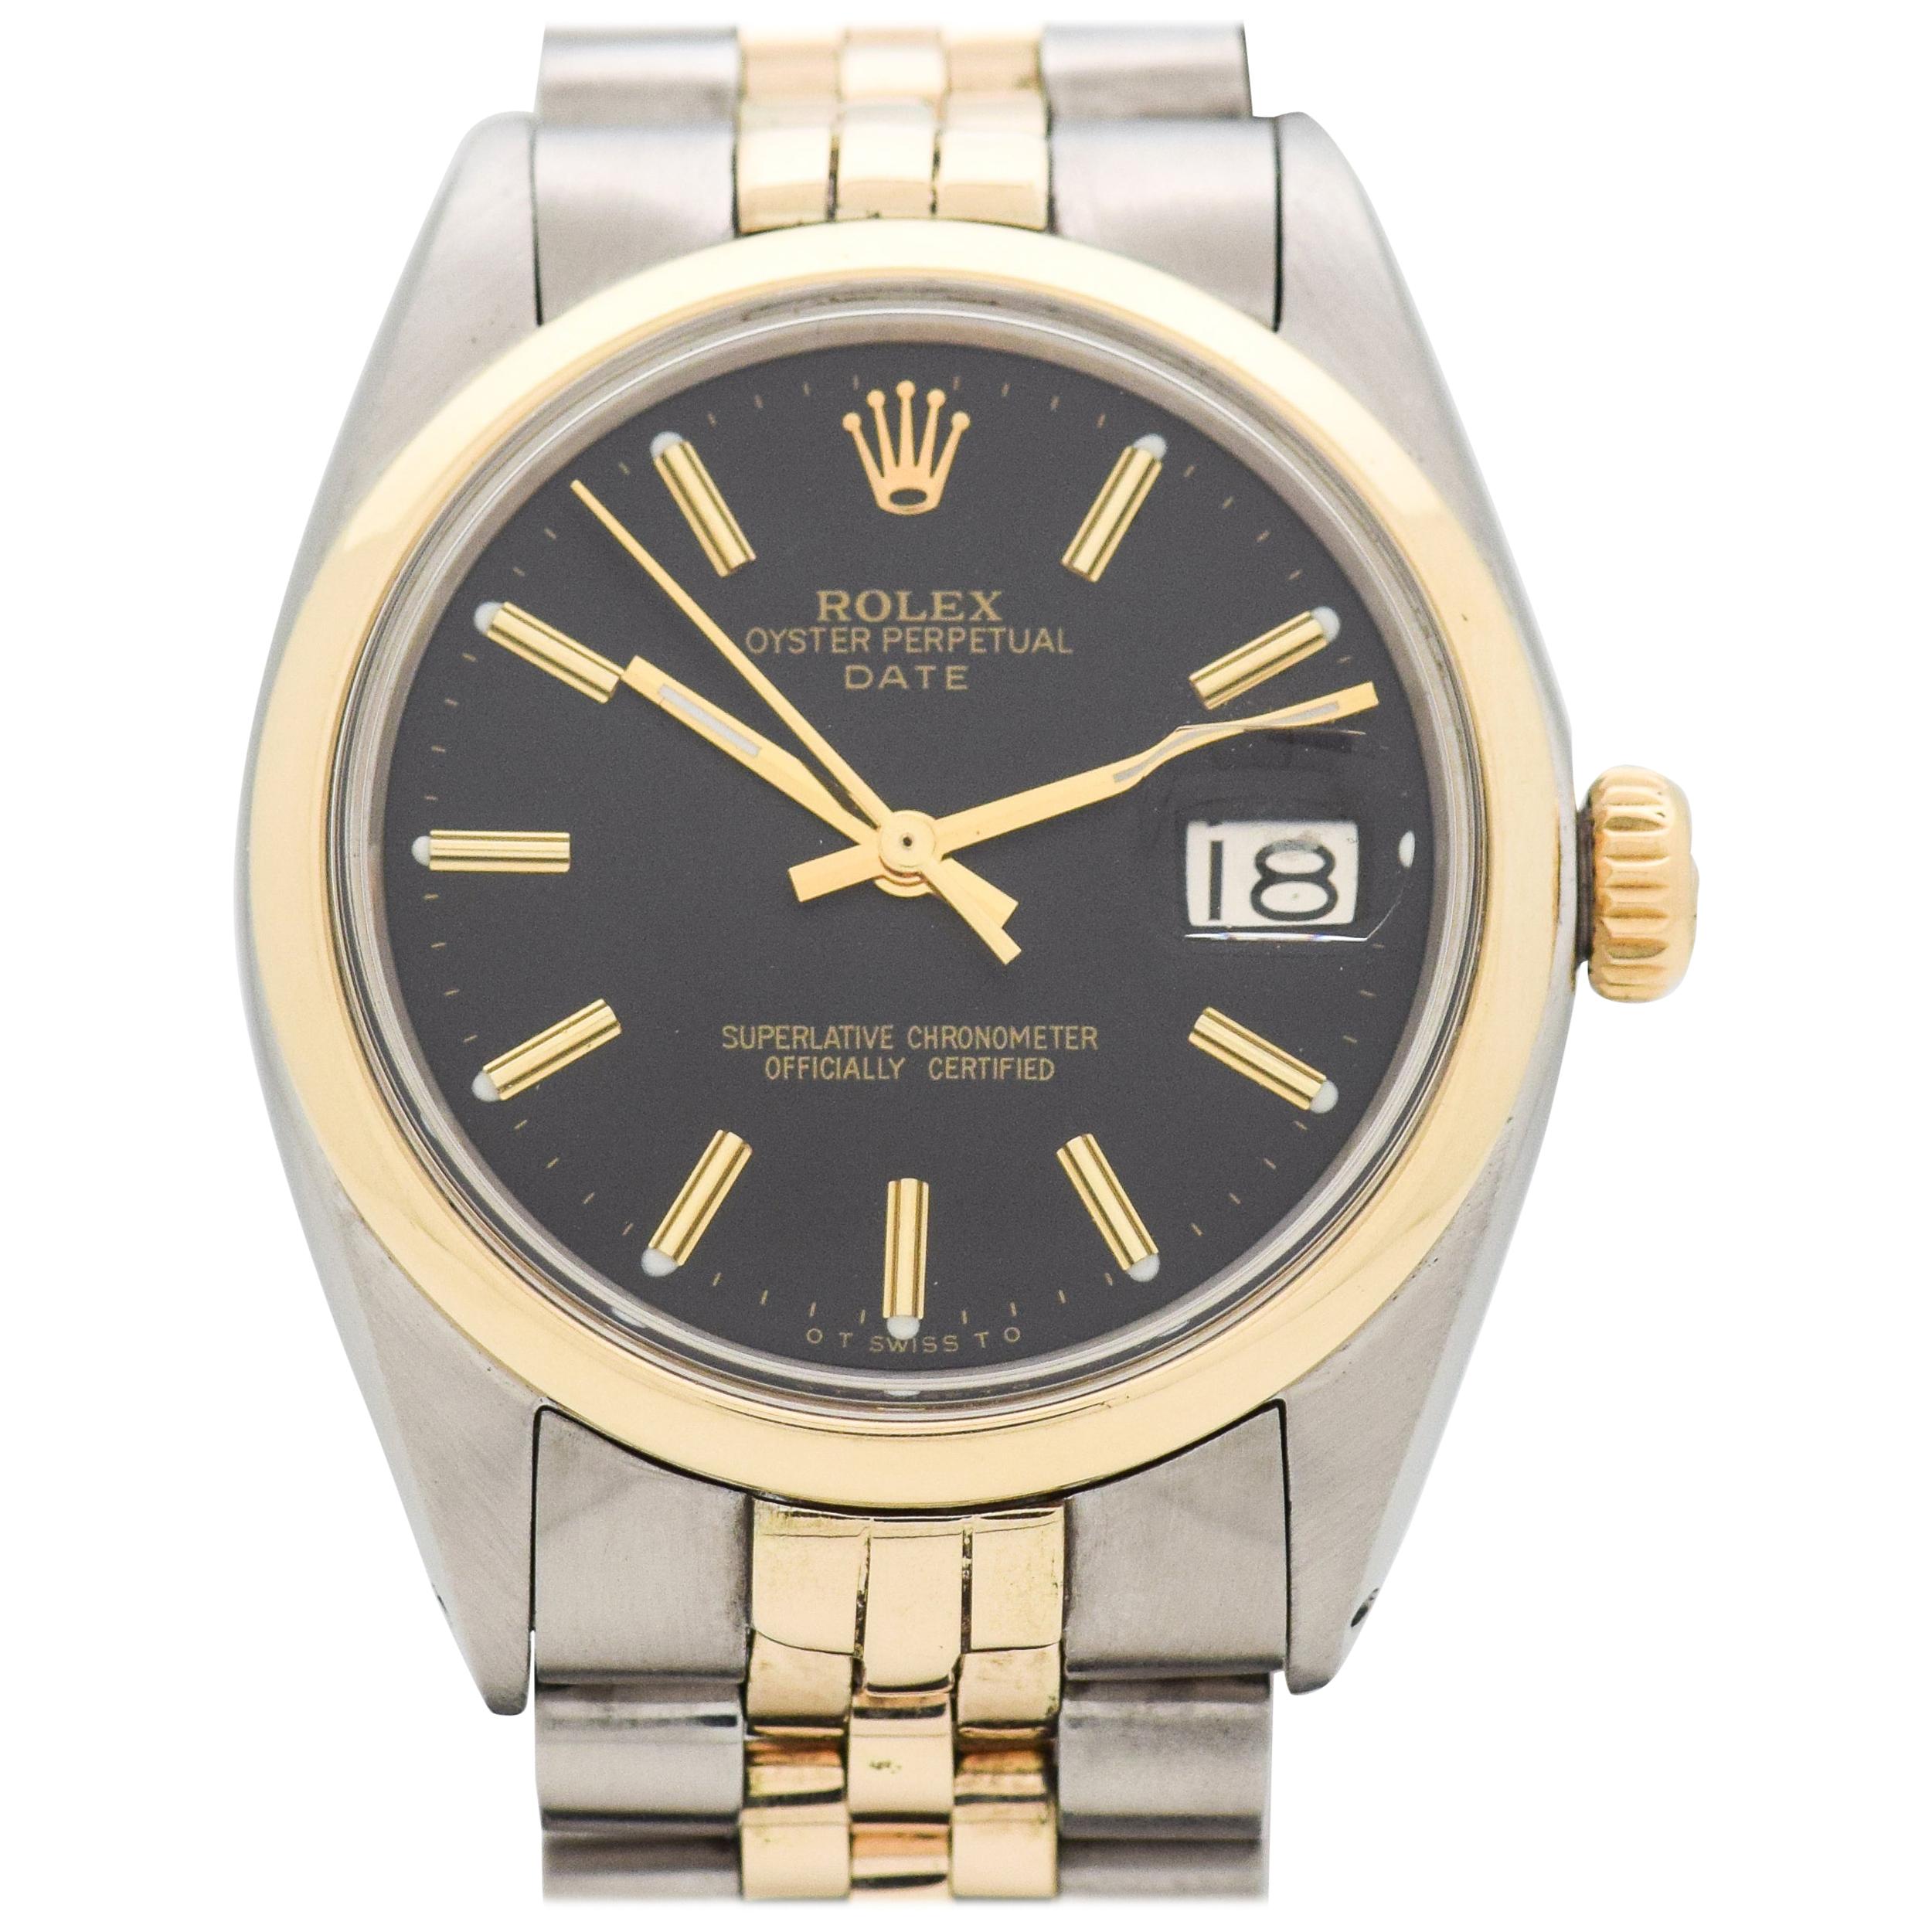 Vintage Rolex Date Automatic Reference 1500 Two-Tone Watch, 1969 For Sale